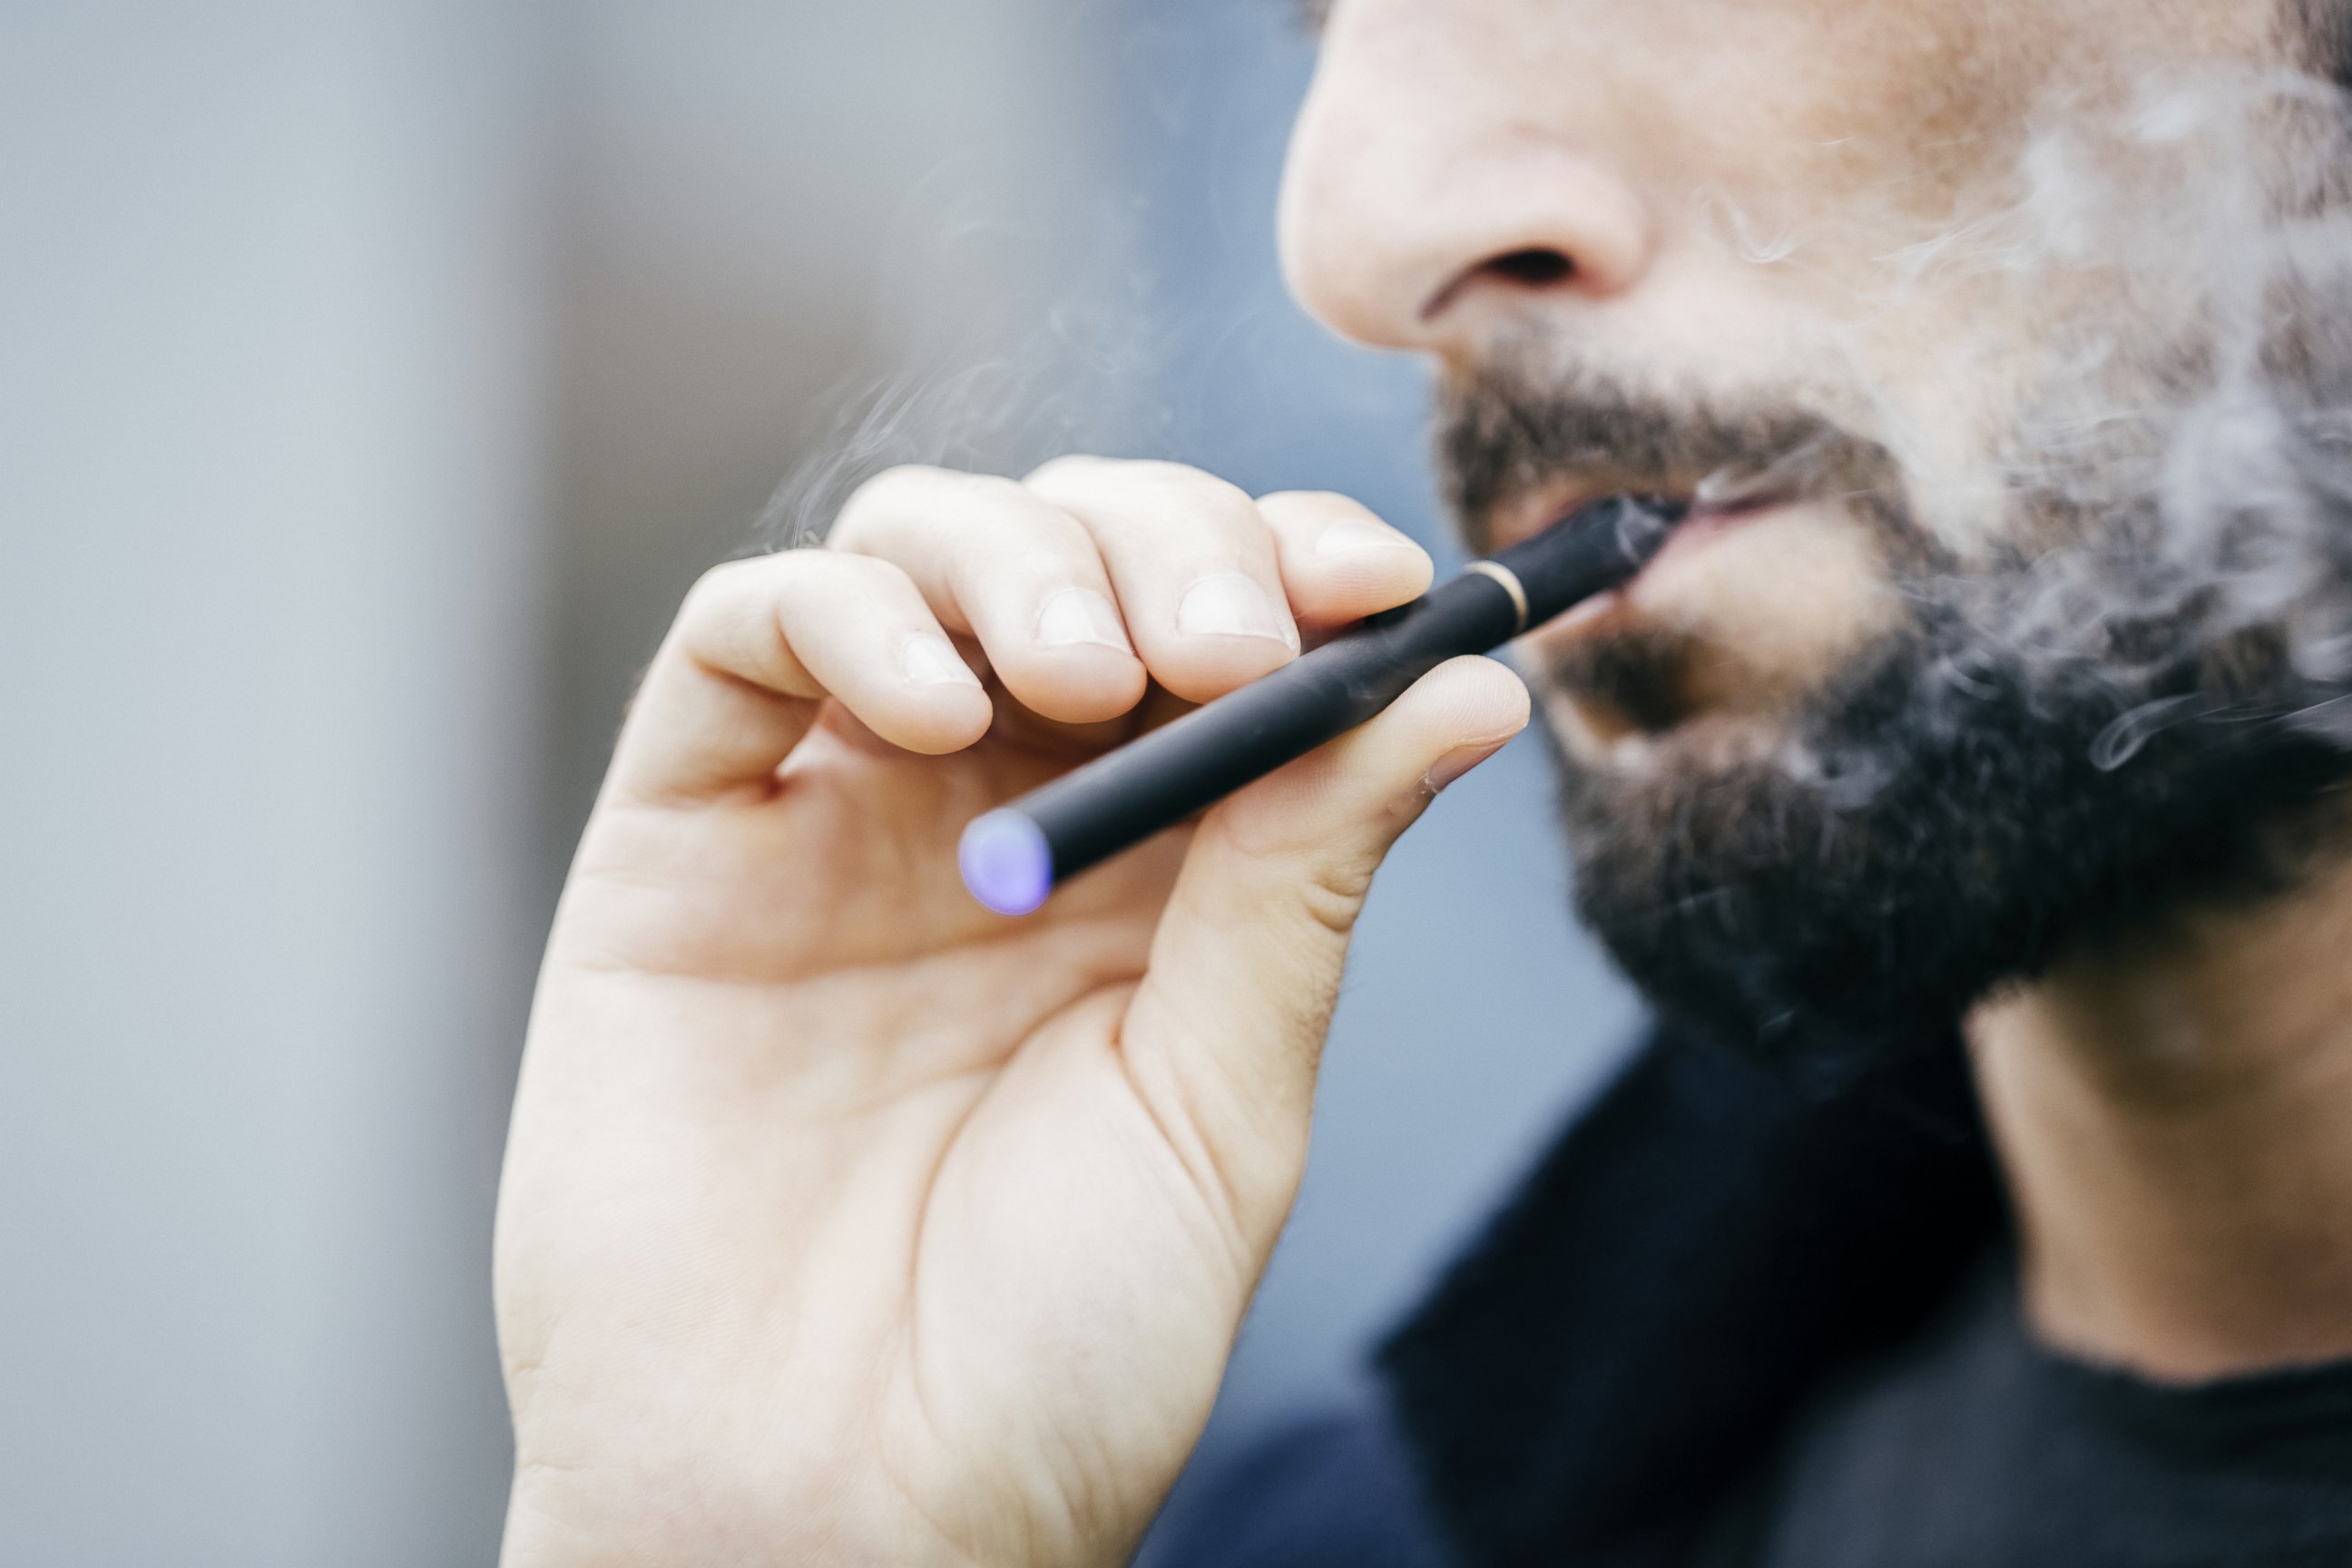 PHOTO: The U.S. Food and Drug Administration announced it will regulate electronic cigarettes as tobacco products.